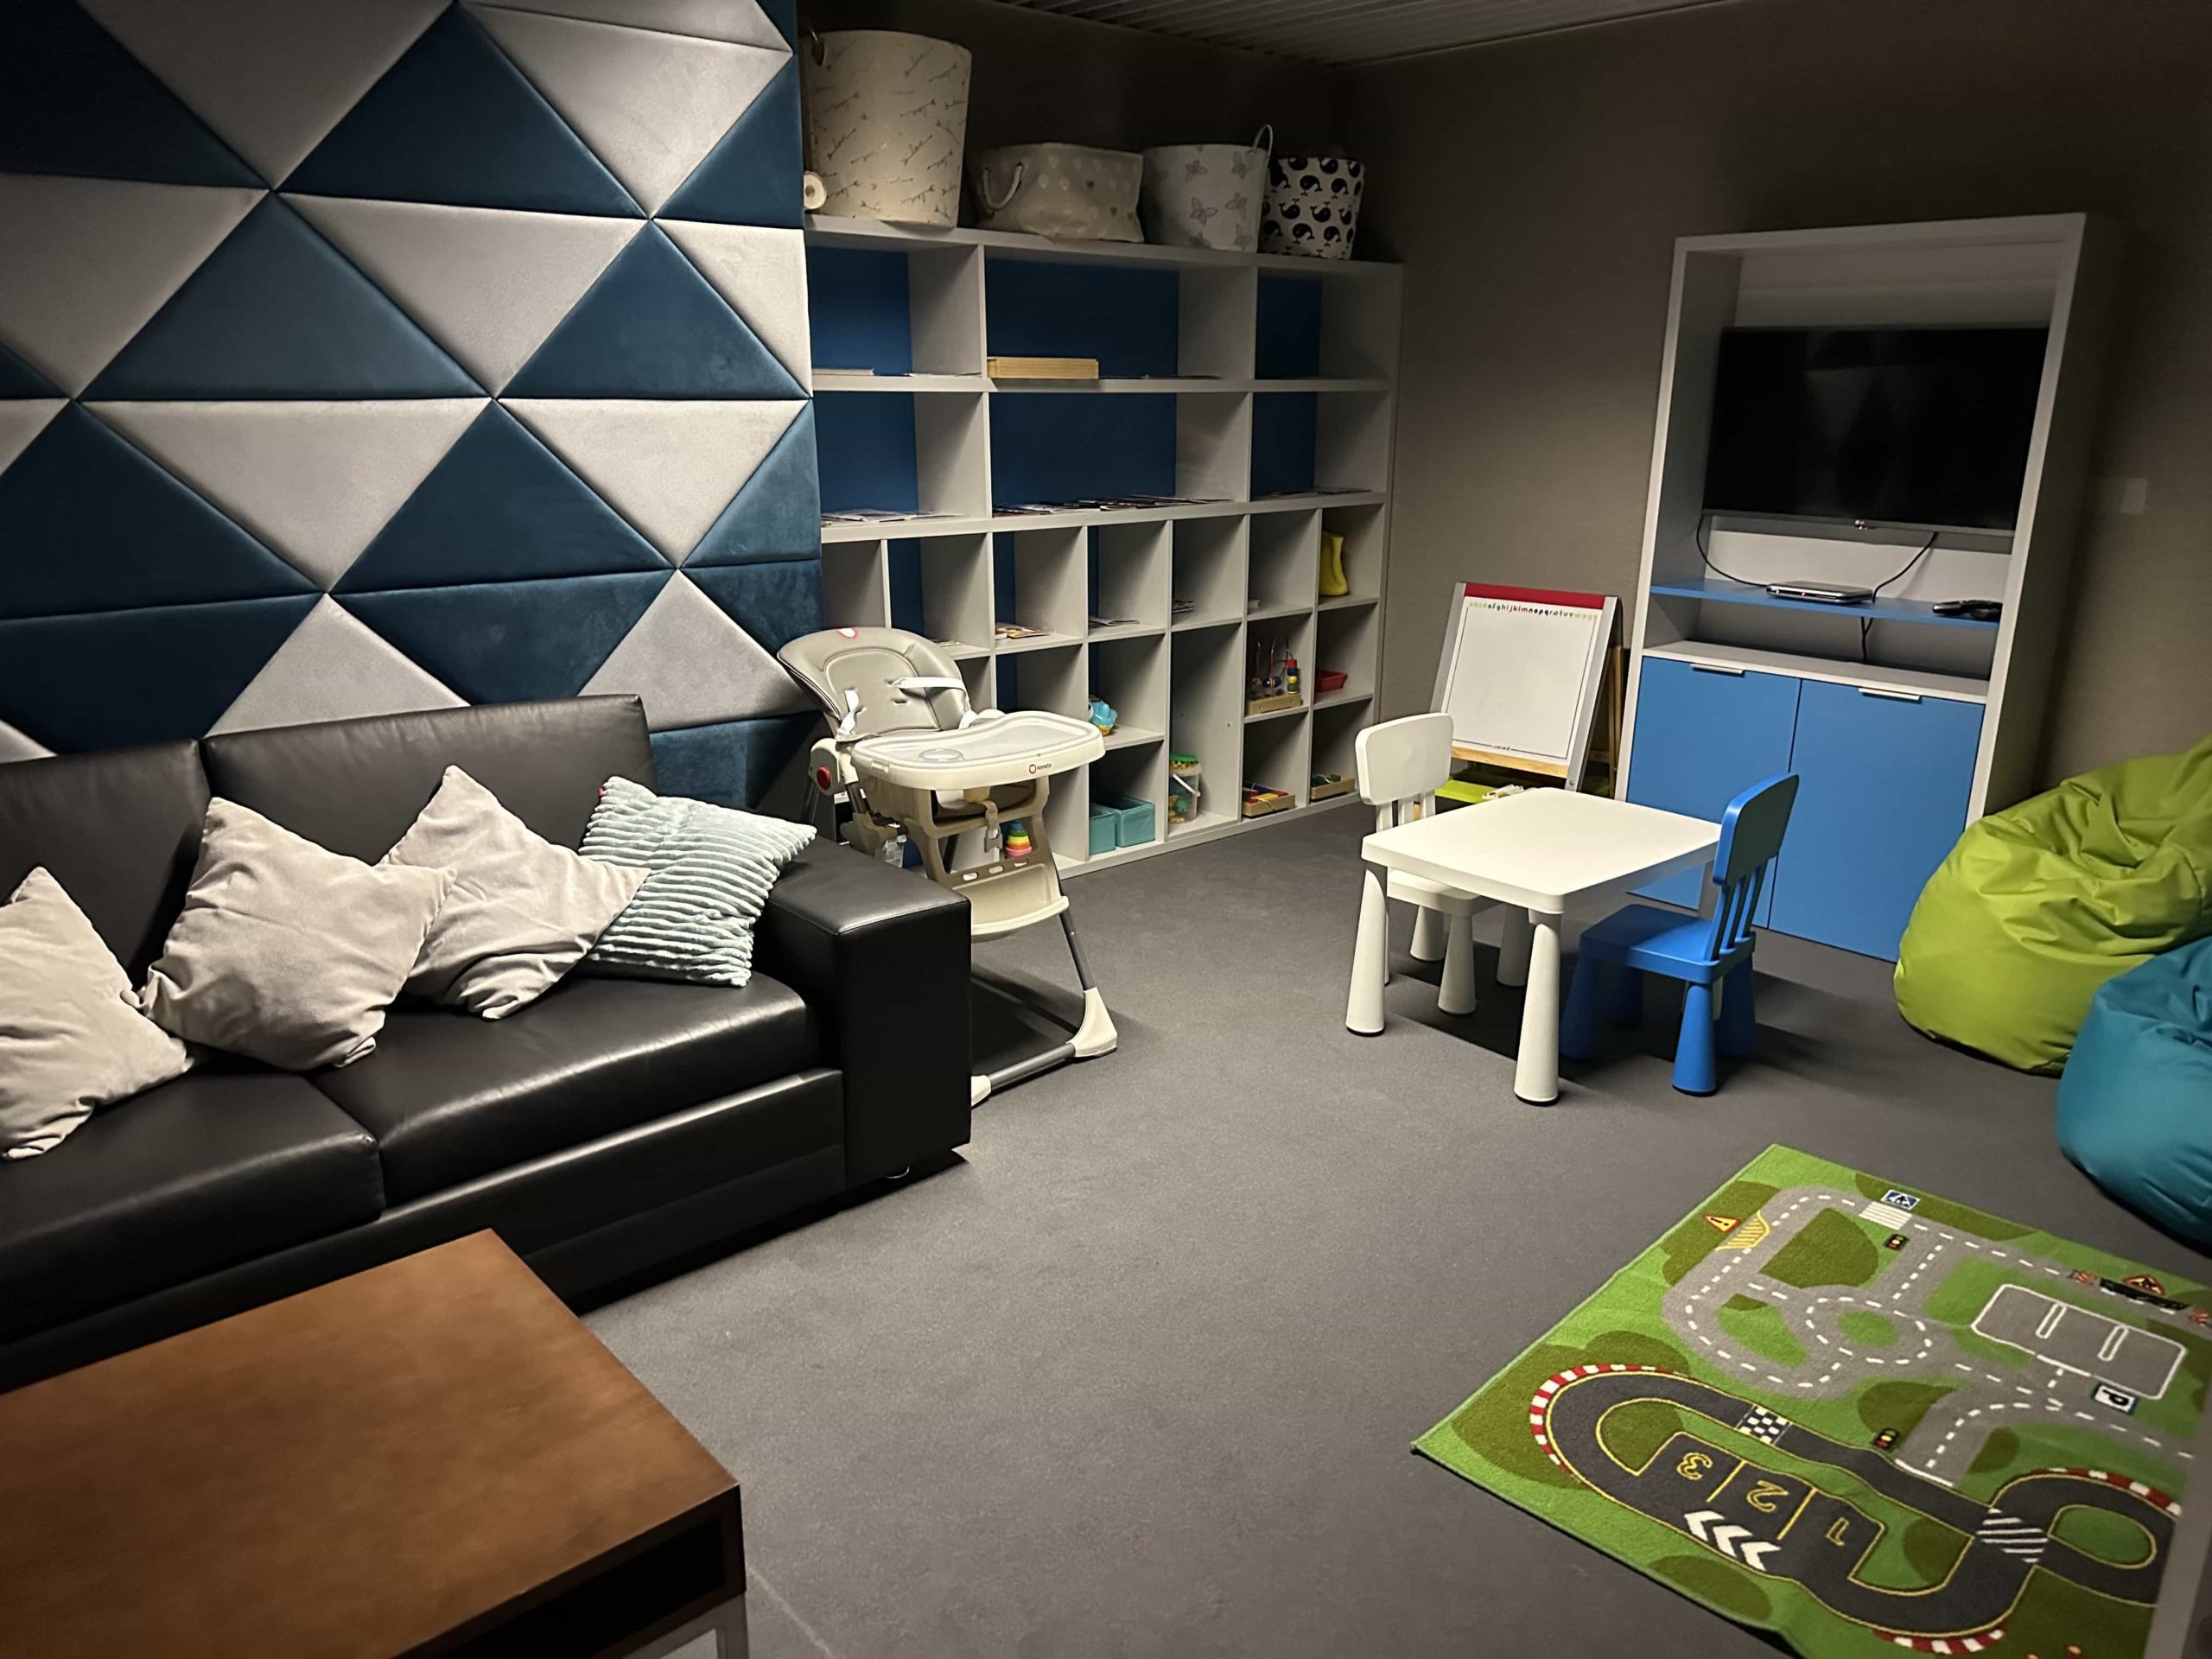 A dimly-lit children's playroom with a sofa, cubby holes, and toys